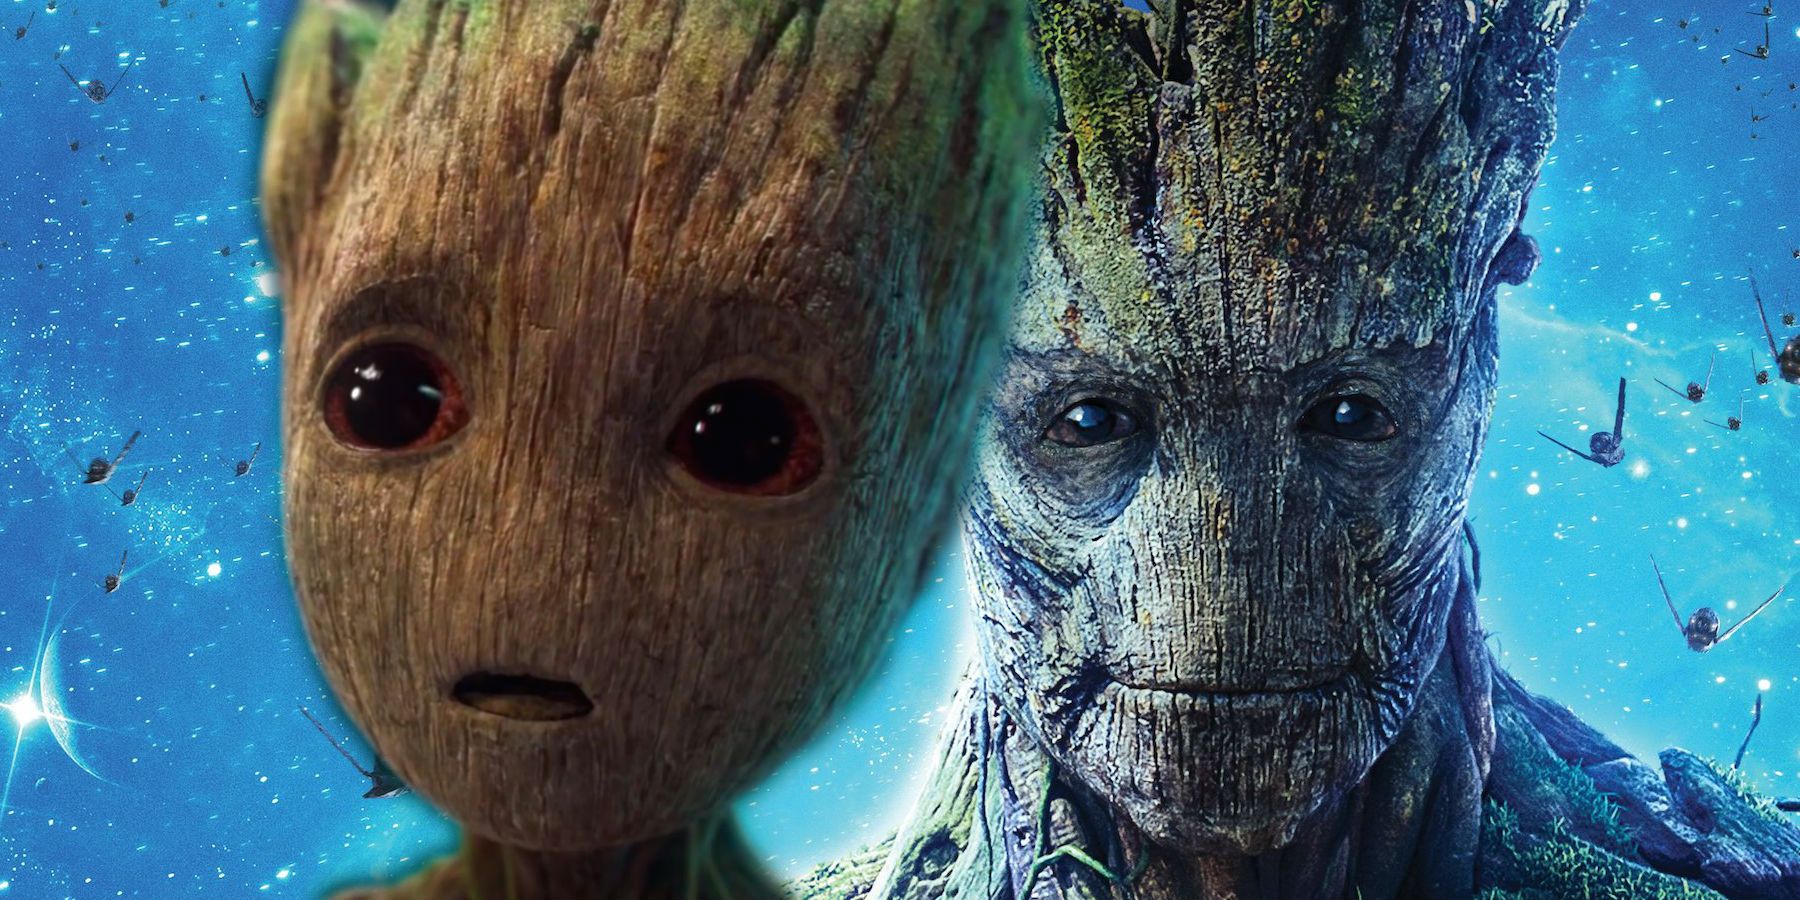 How Big Will Groot Be in Guardians 3?